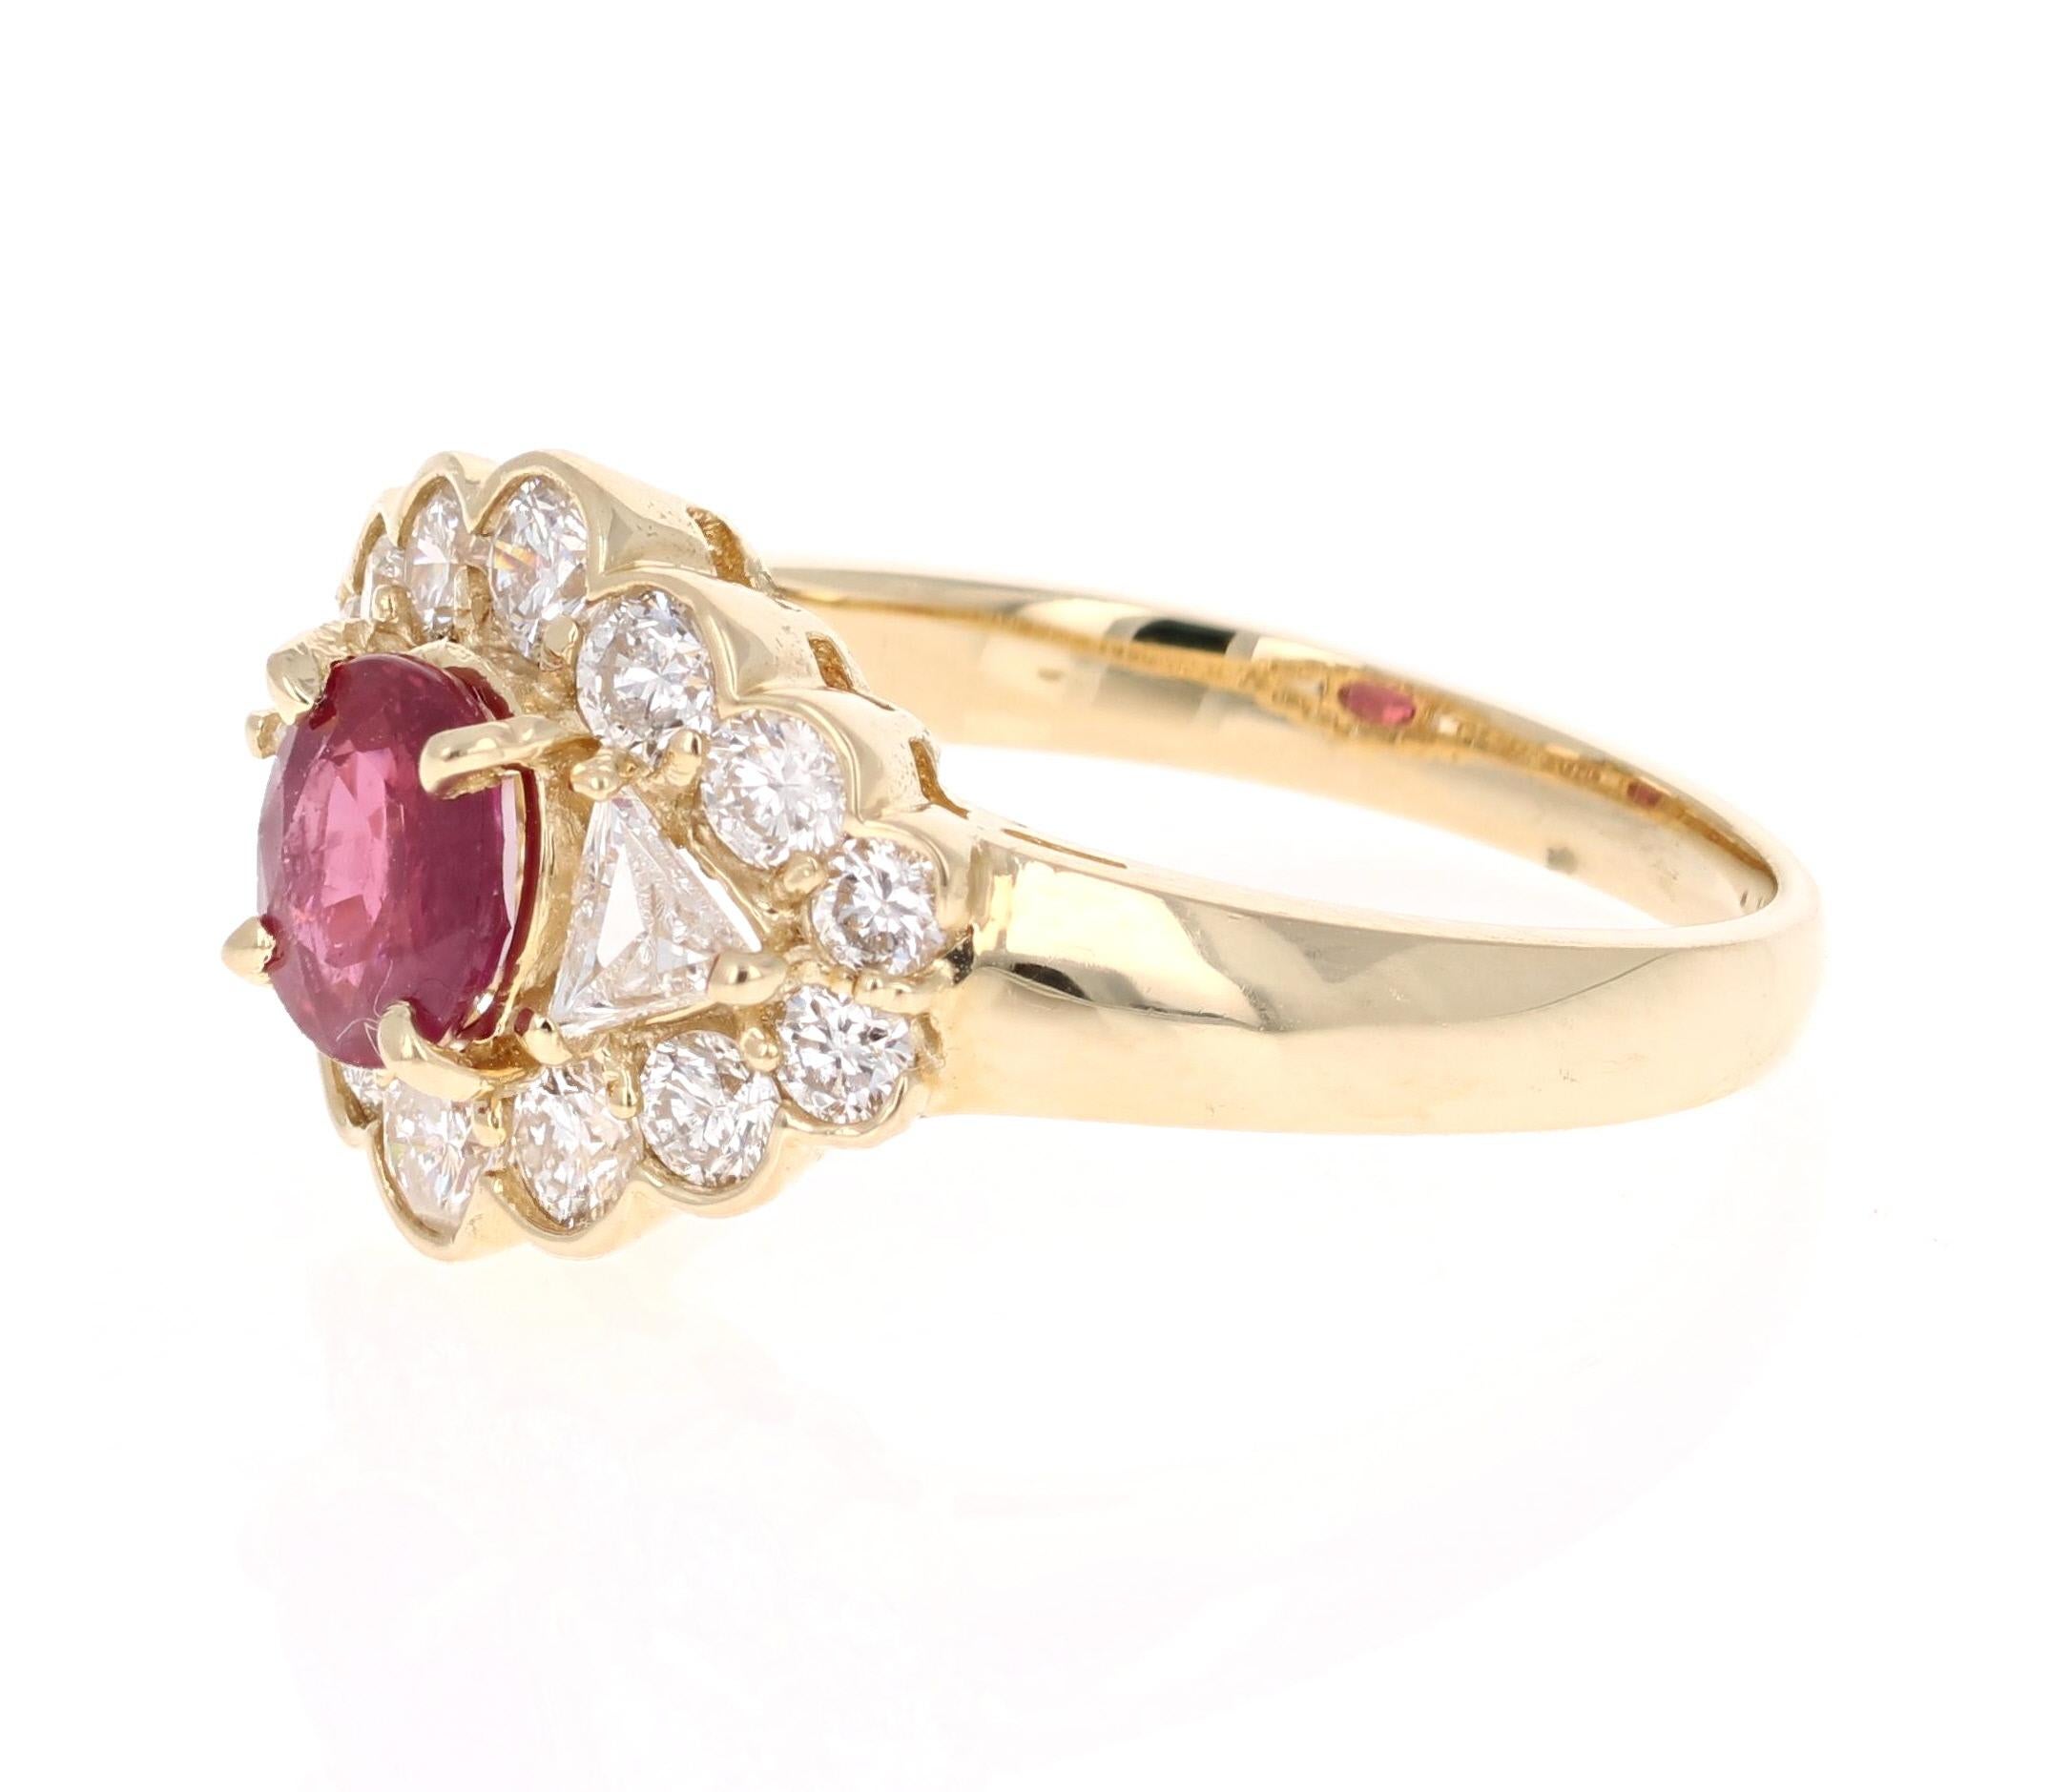 Contemporary 1.75 Carat Oval Cut Burmese Ruby Diamond 14 Karat Yellow Gold Cluster Ring For Sale